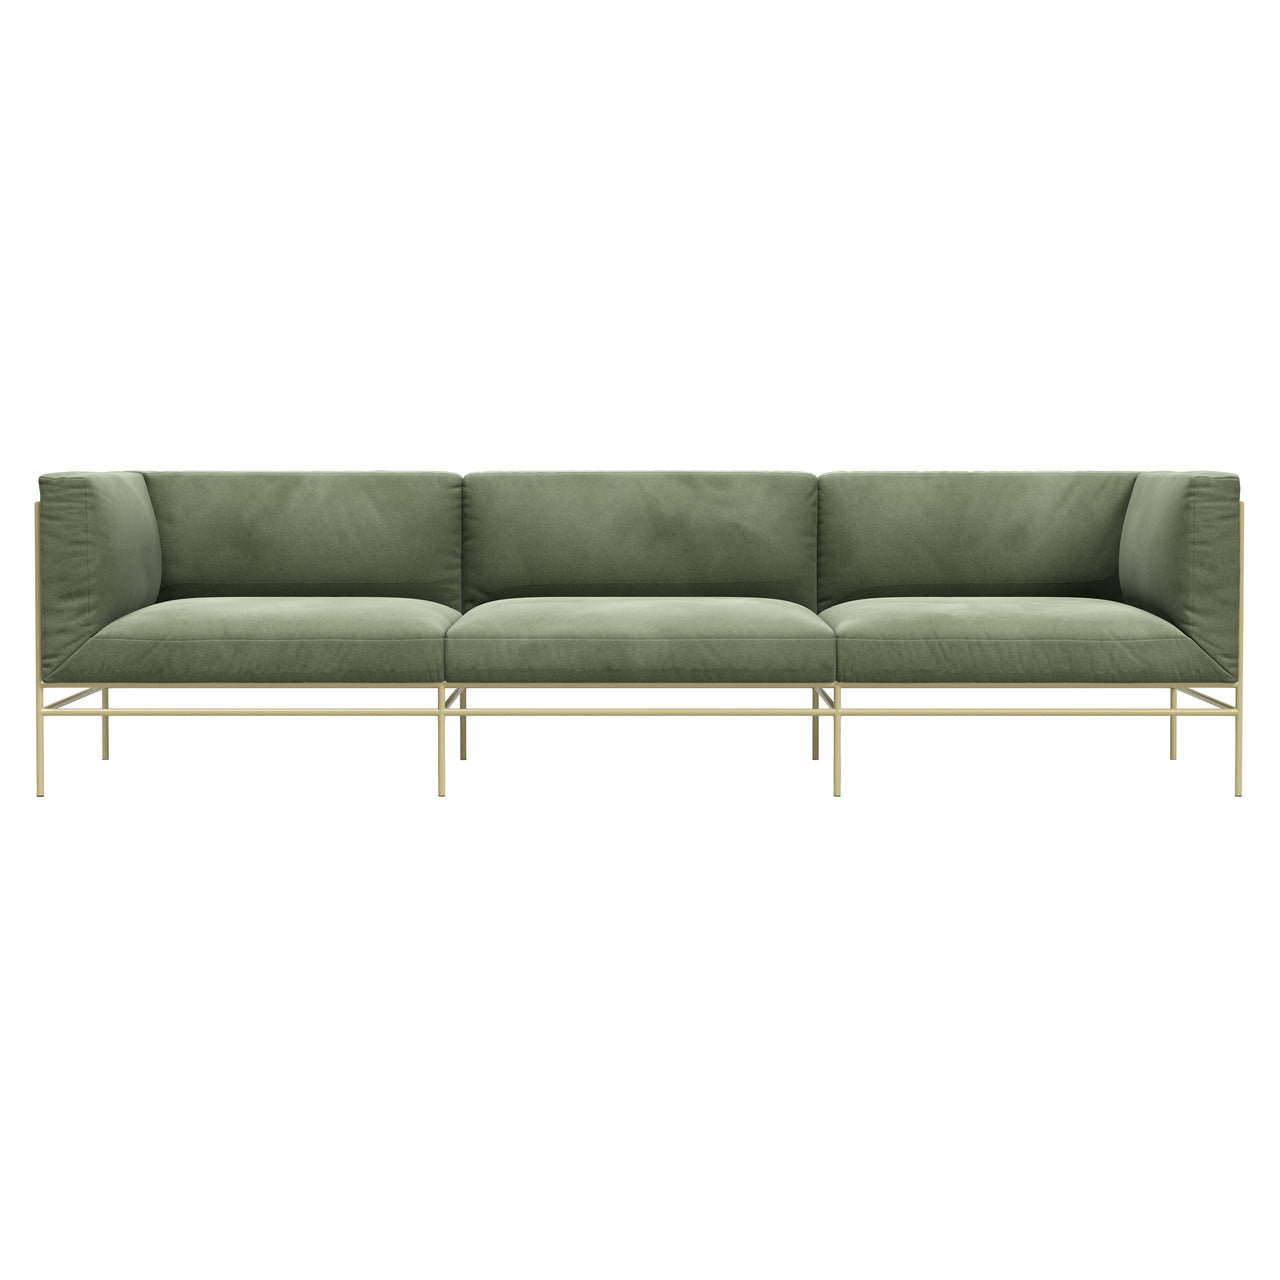 Middleweight Sofa: 3 + Champagne